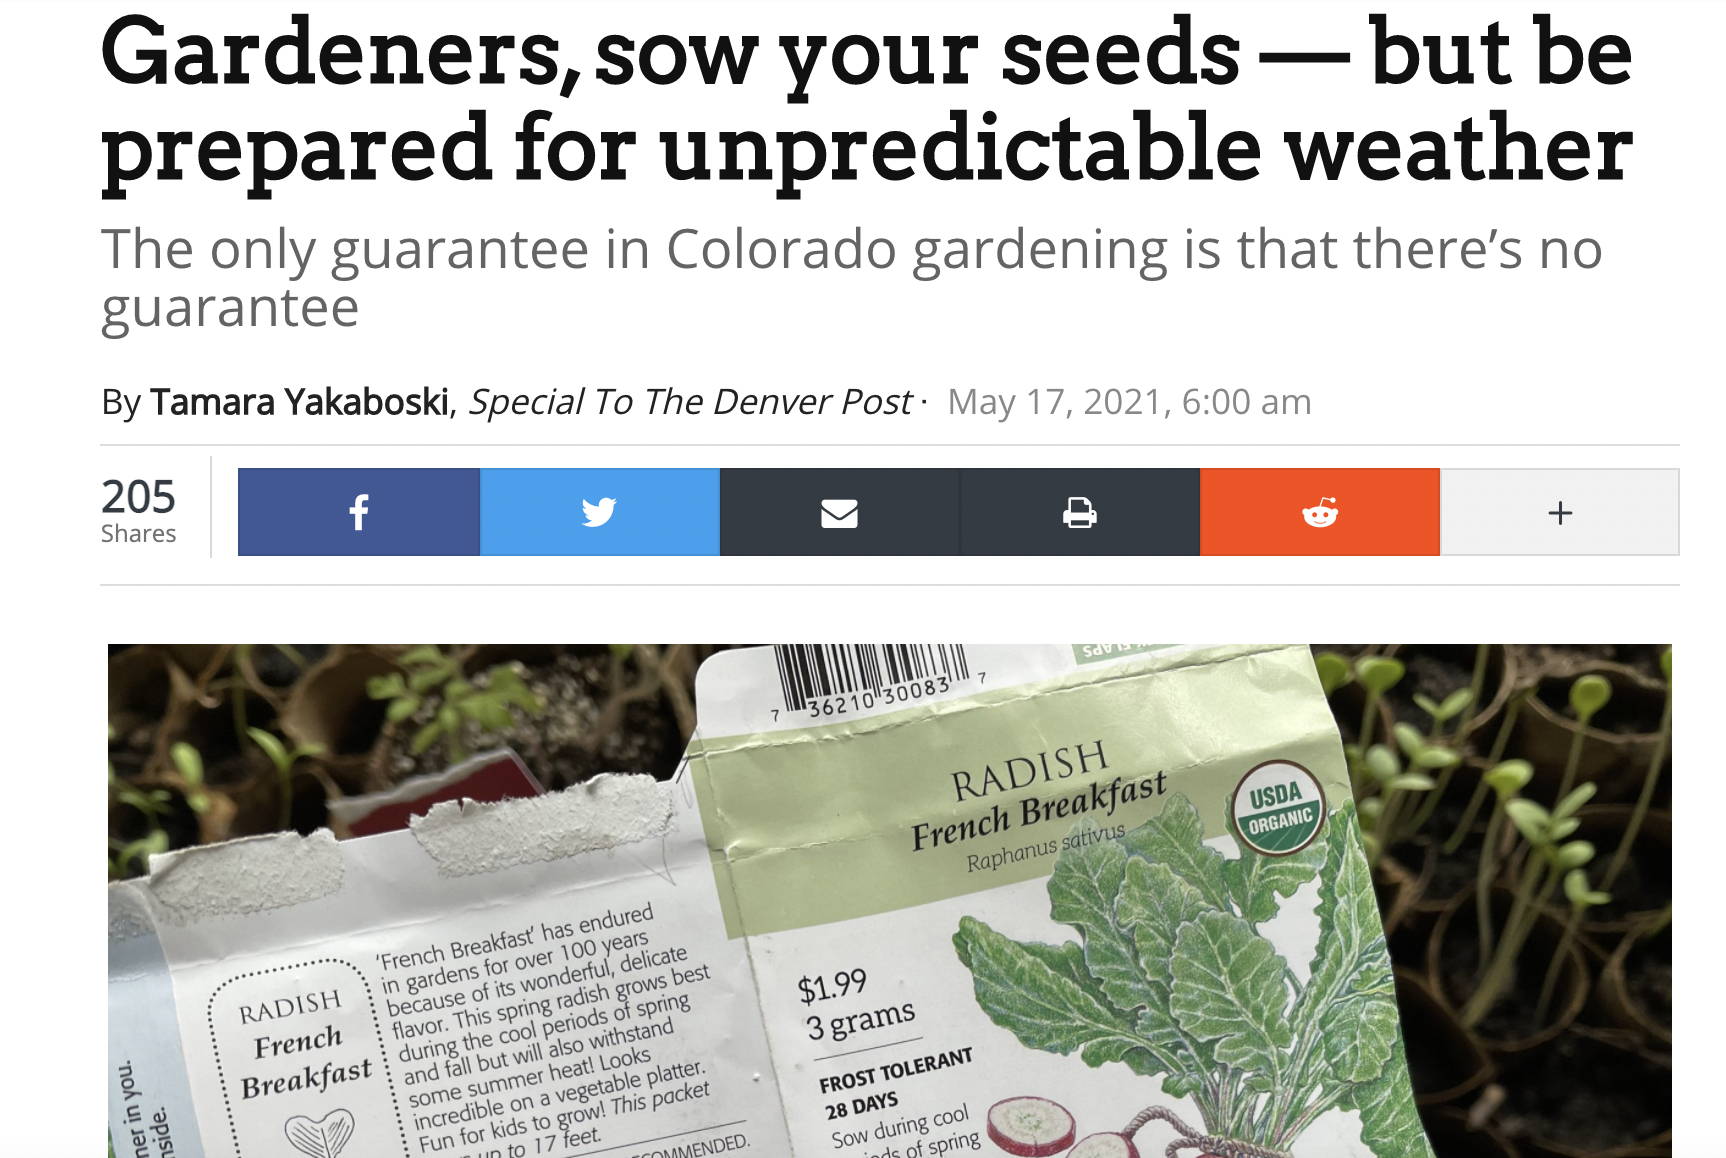 Gardeners, sow your seeds — but be prepared for unpredictable weather